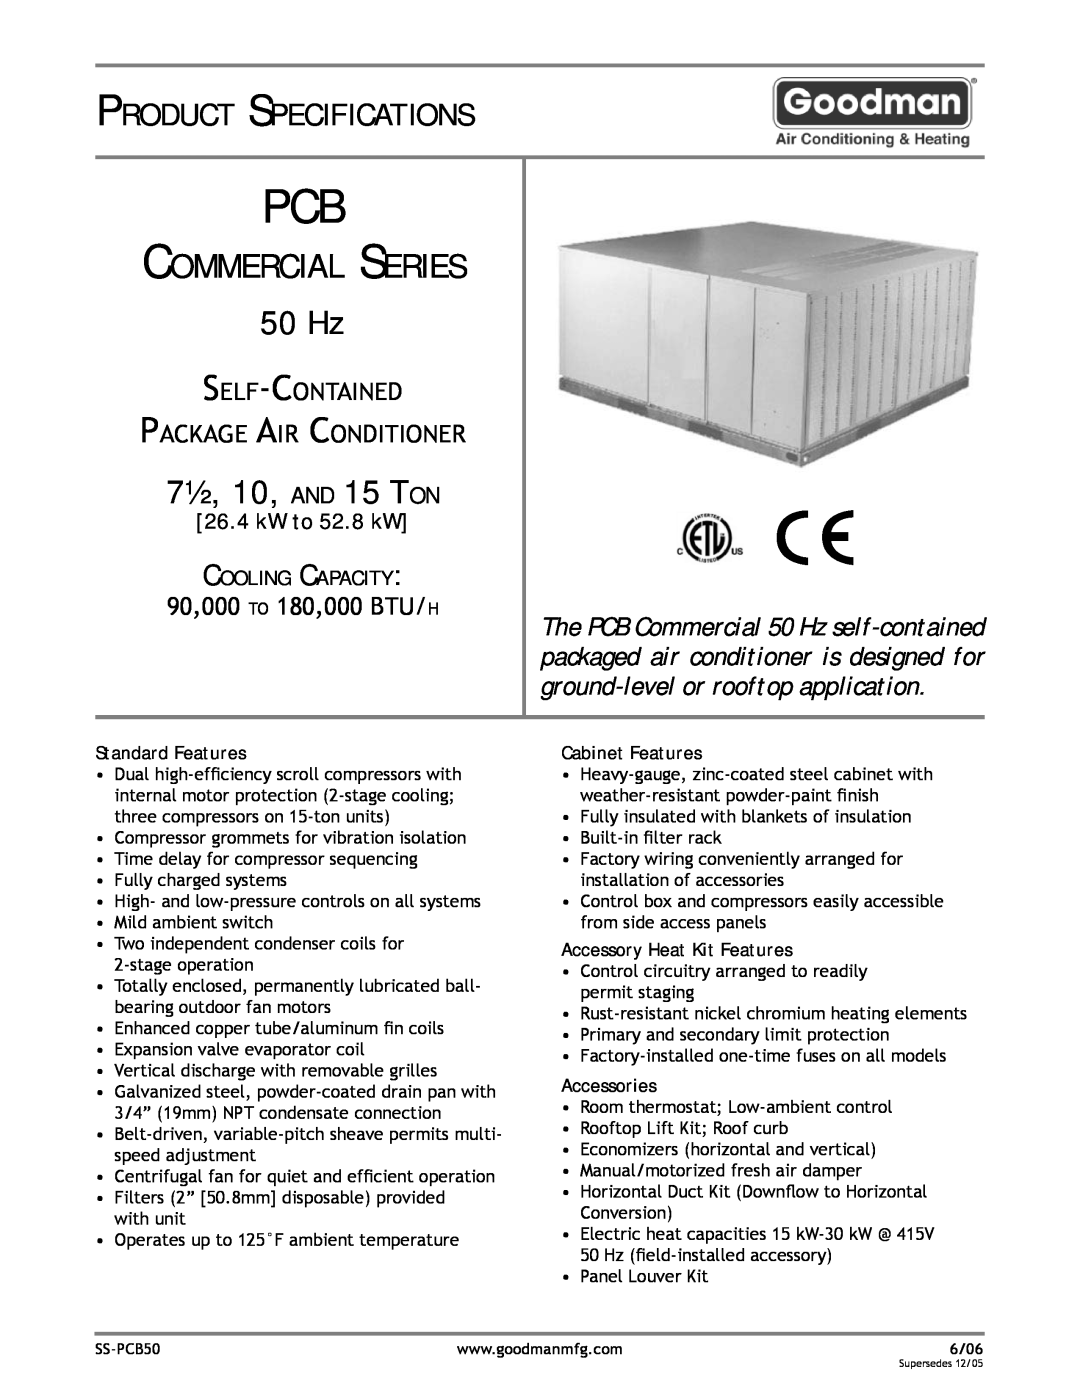 Goodman Mfg SS-PCB50 specifications Self-Contained Package Air Conditioner, 90,000 TO 180,000 BTU/H, kW to 52.8 kW 